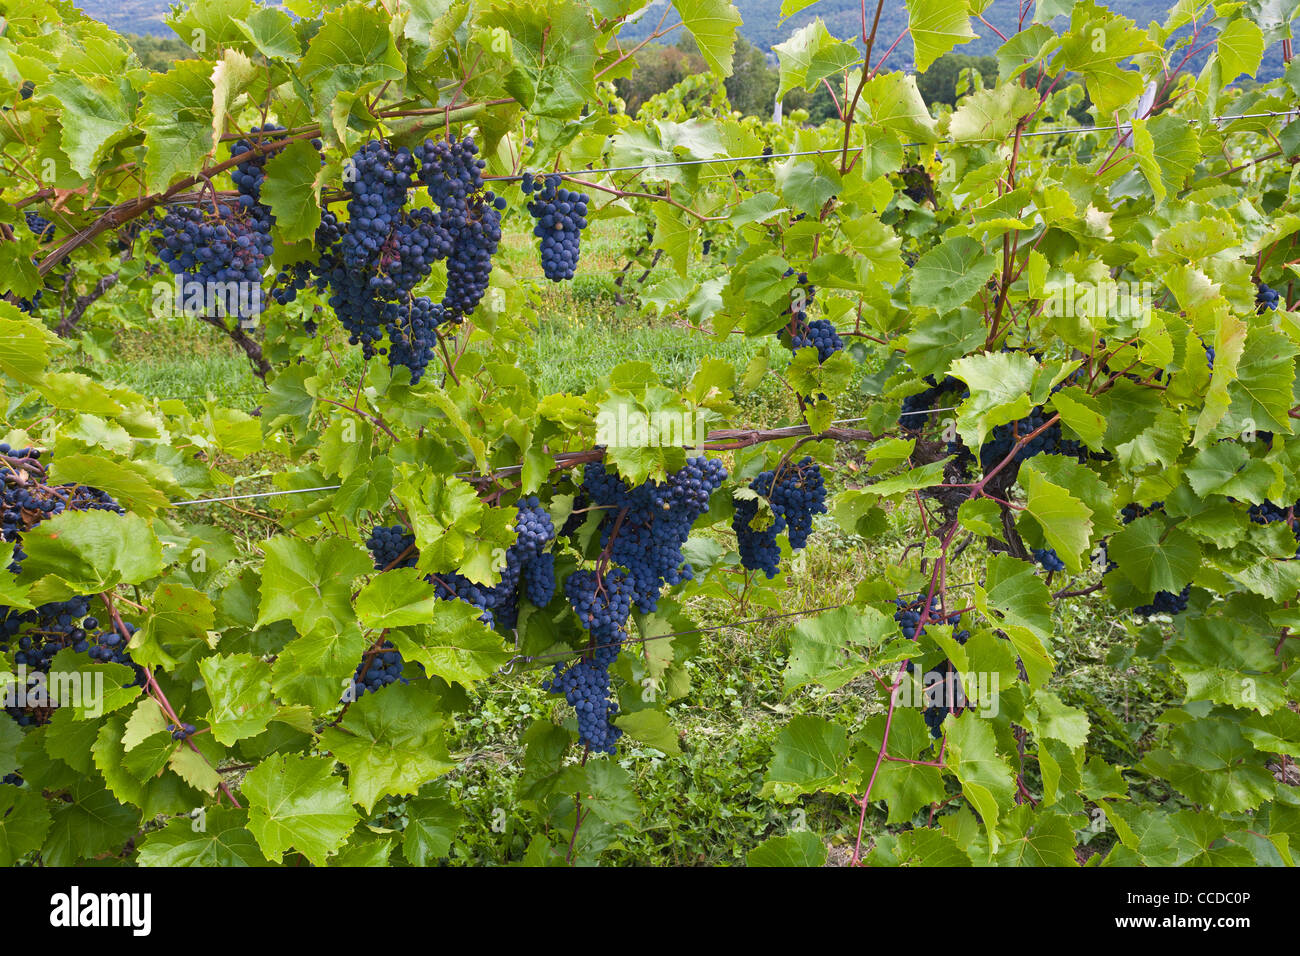 Grapes in vineyard in the Finger Lakes region of New York State Stock Photo